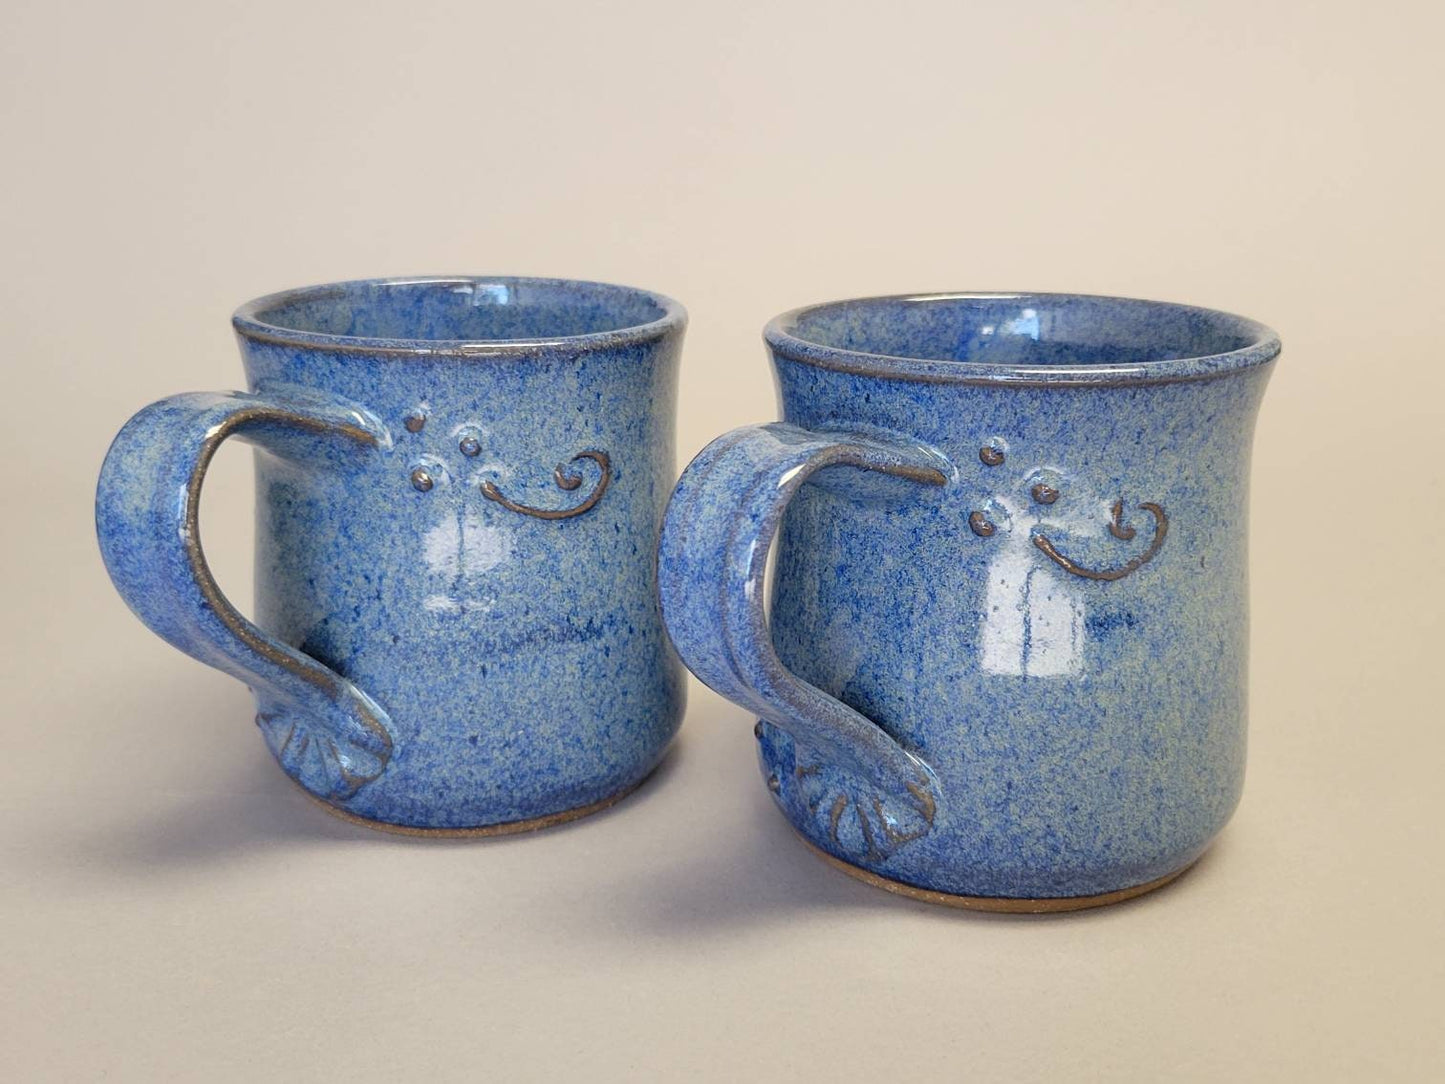 Large Swirl Texture Coffee Mugs with Handles Handmade Stoneware Pottery in Farmhouse Blue